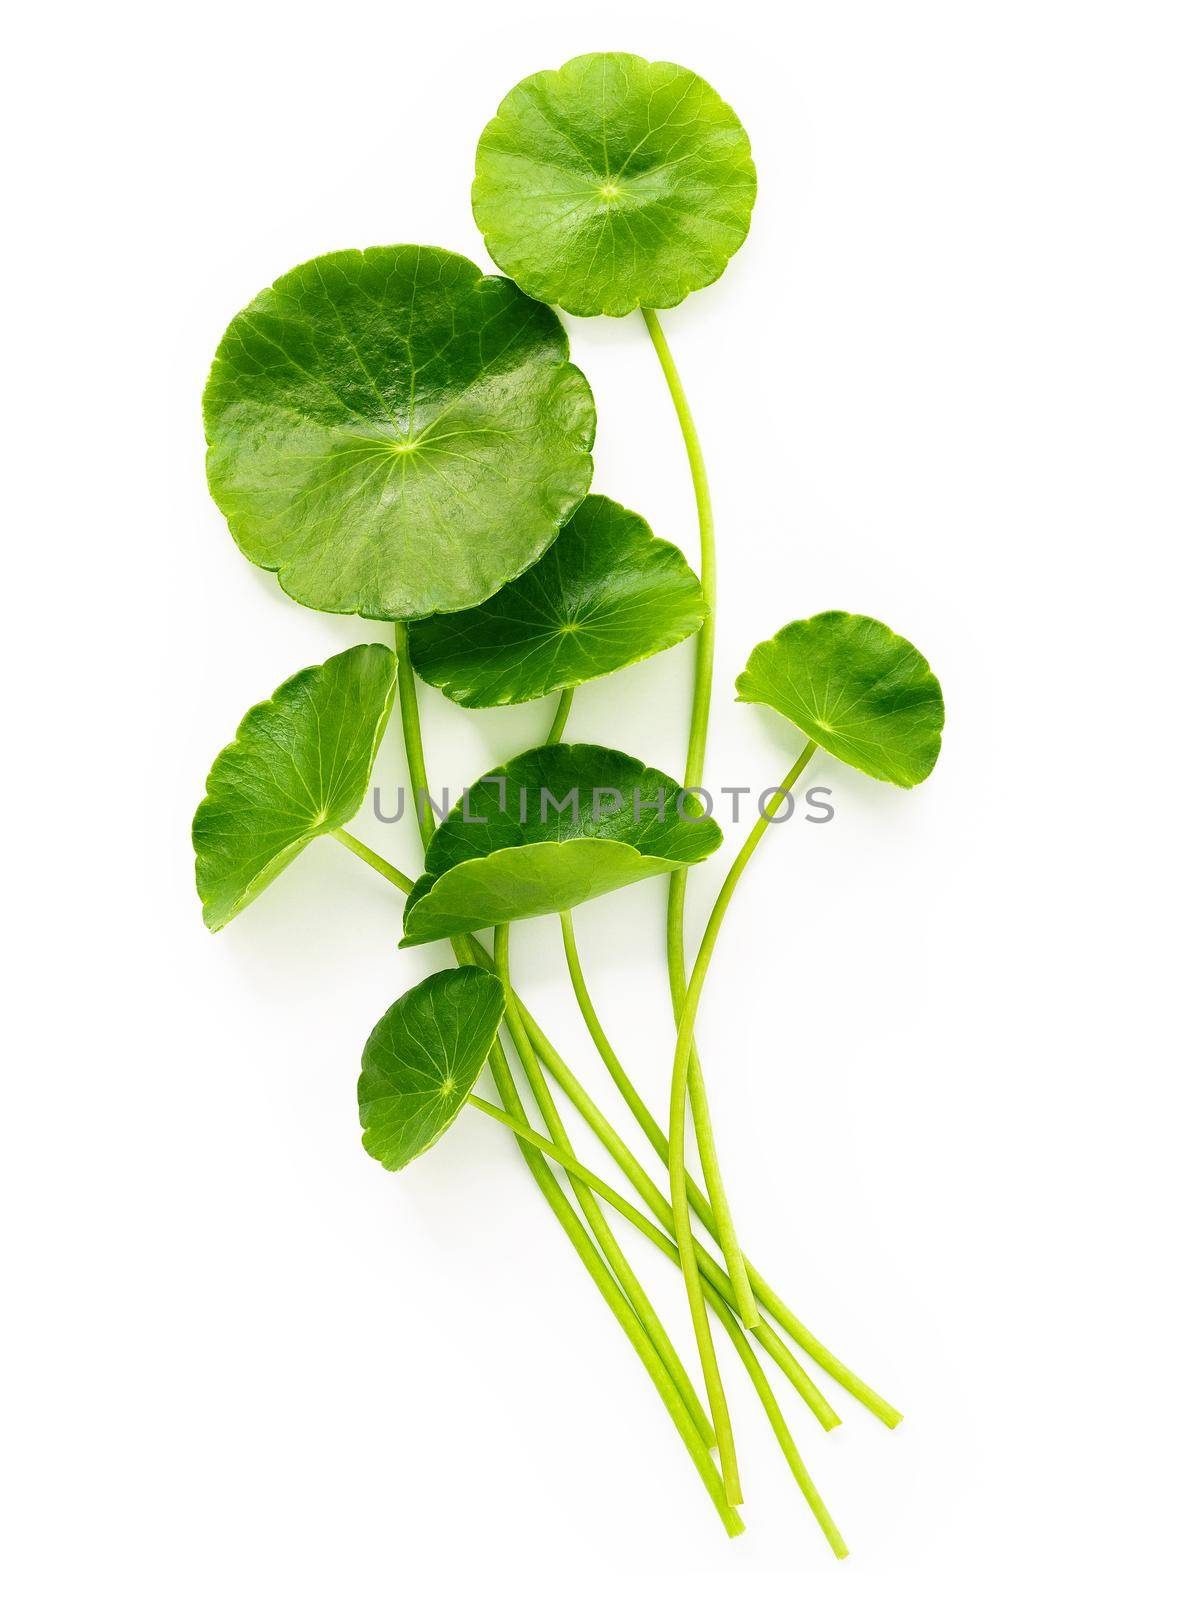 Centella asiatica leaves isolated on white background. by kerdkanno